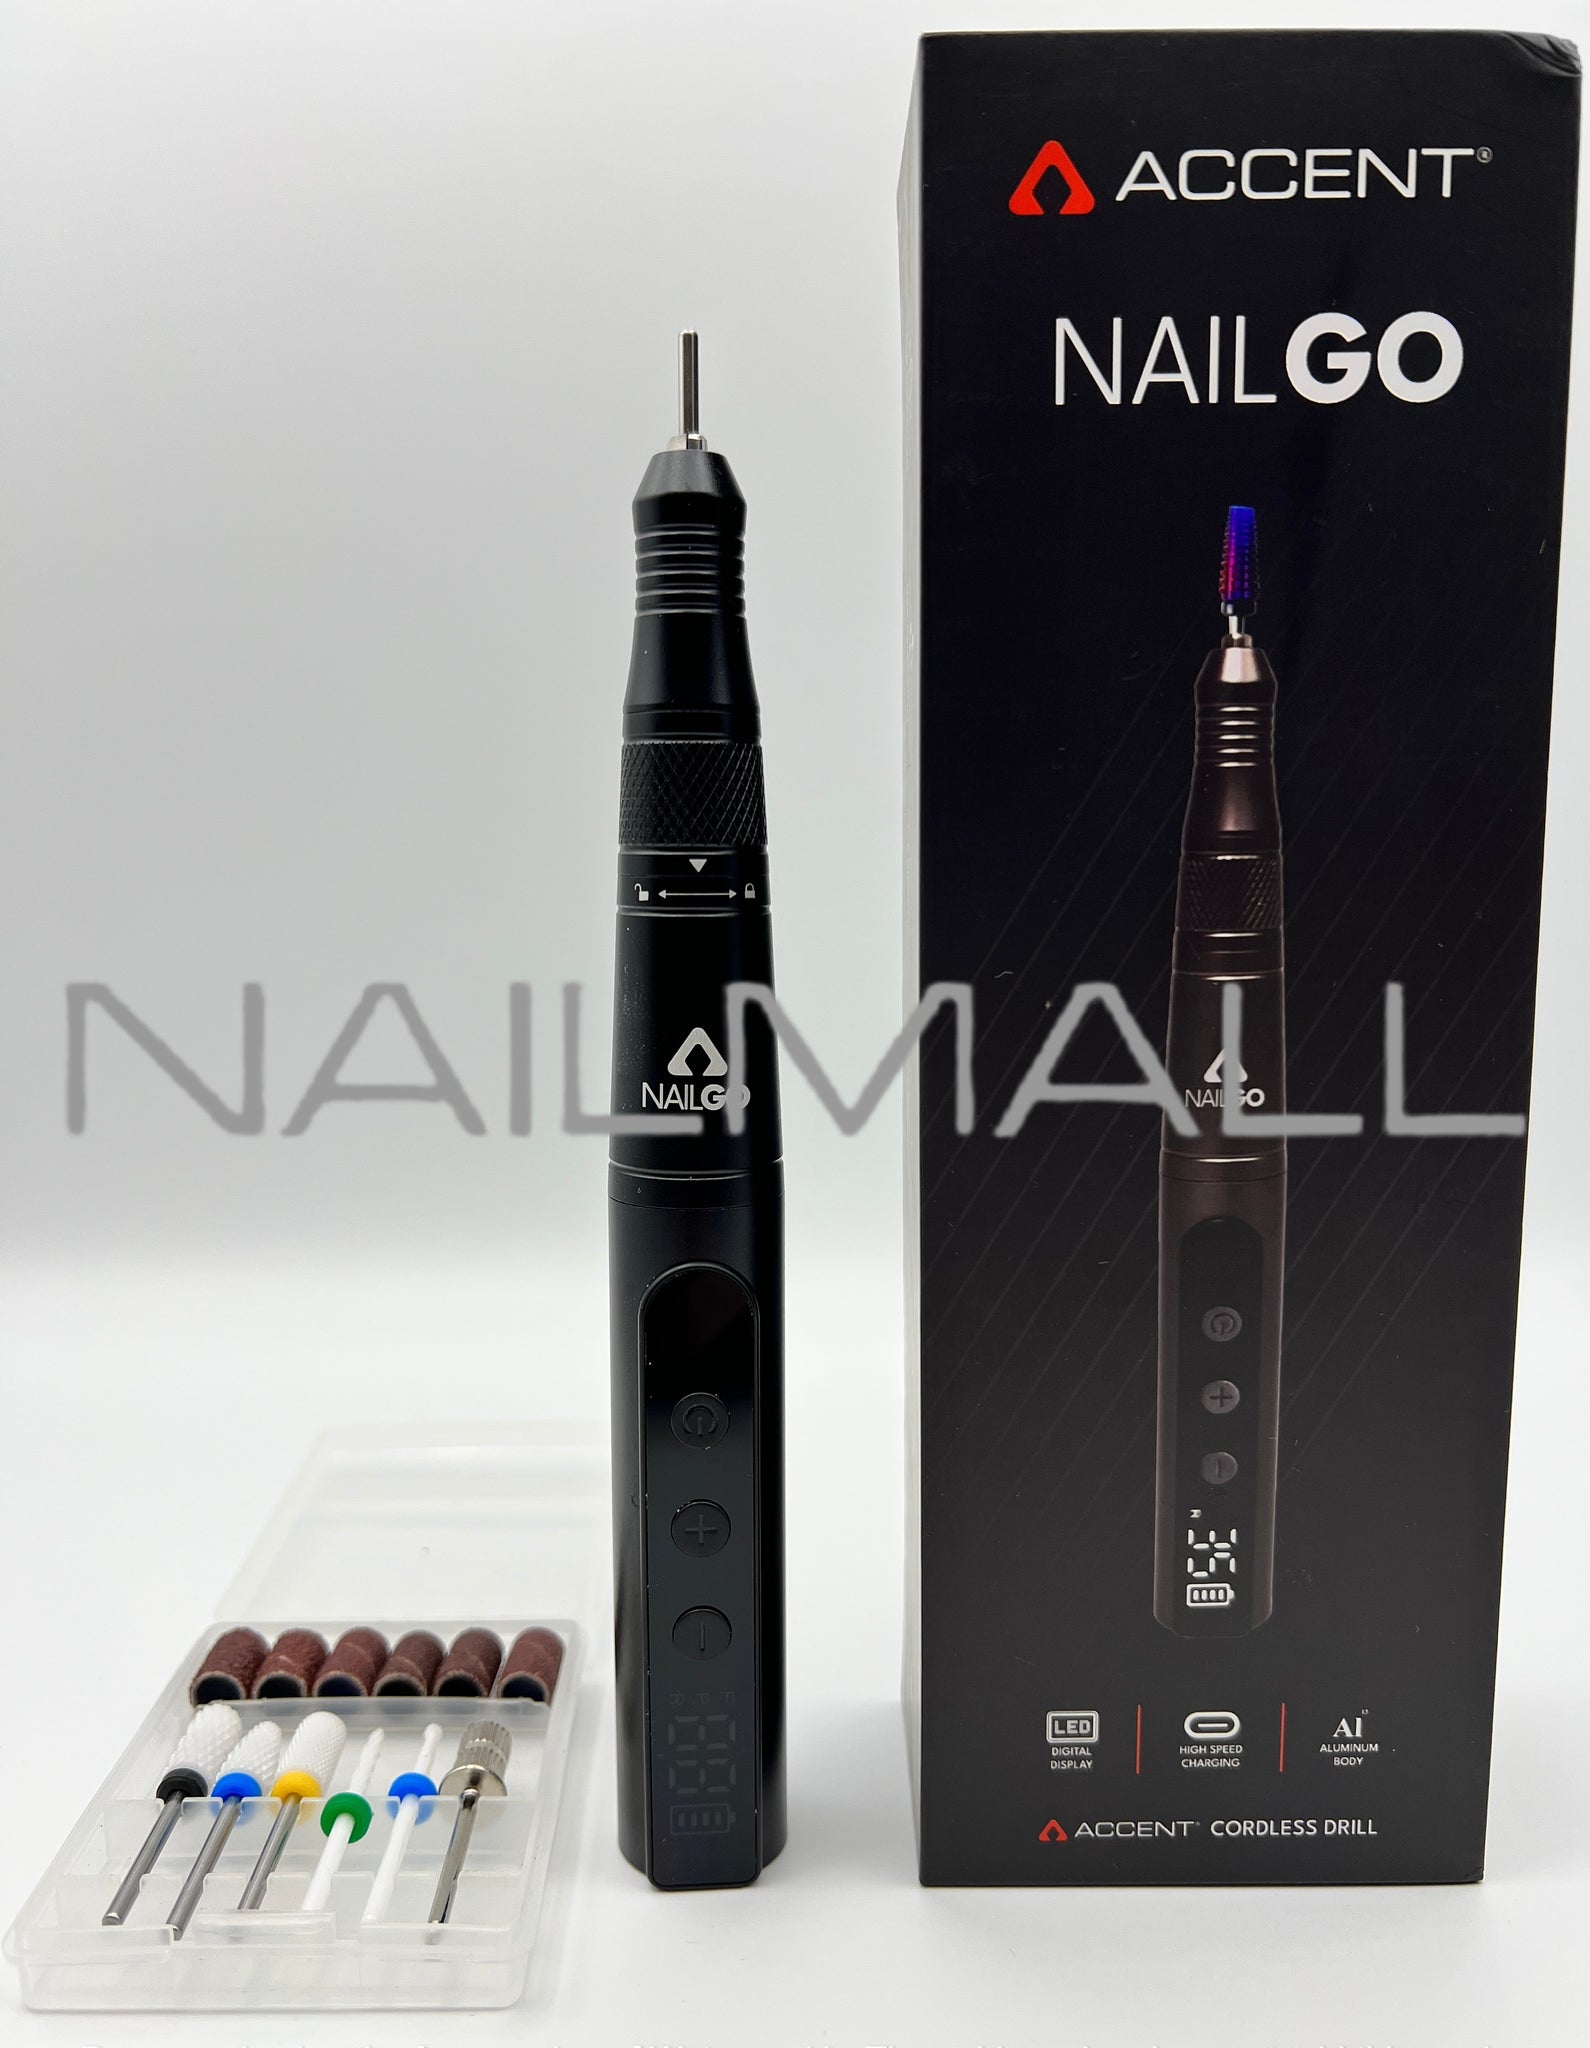 Accent Nailgo Cordless Nail Drill with C-Type Charging and Digital Display